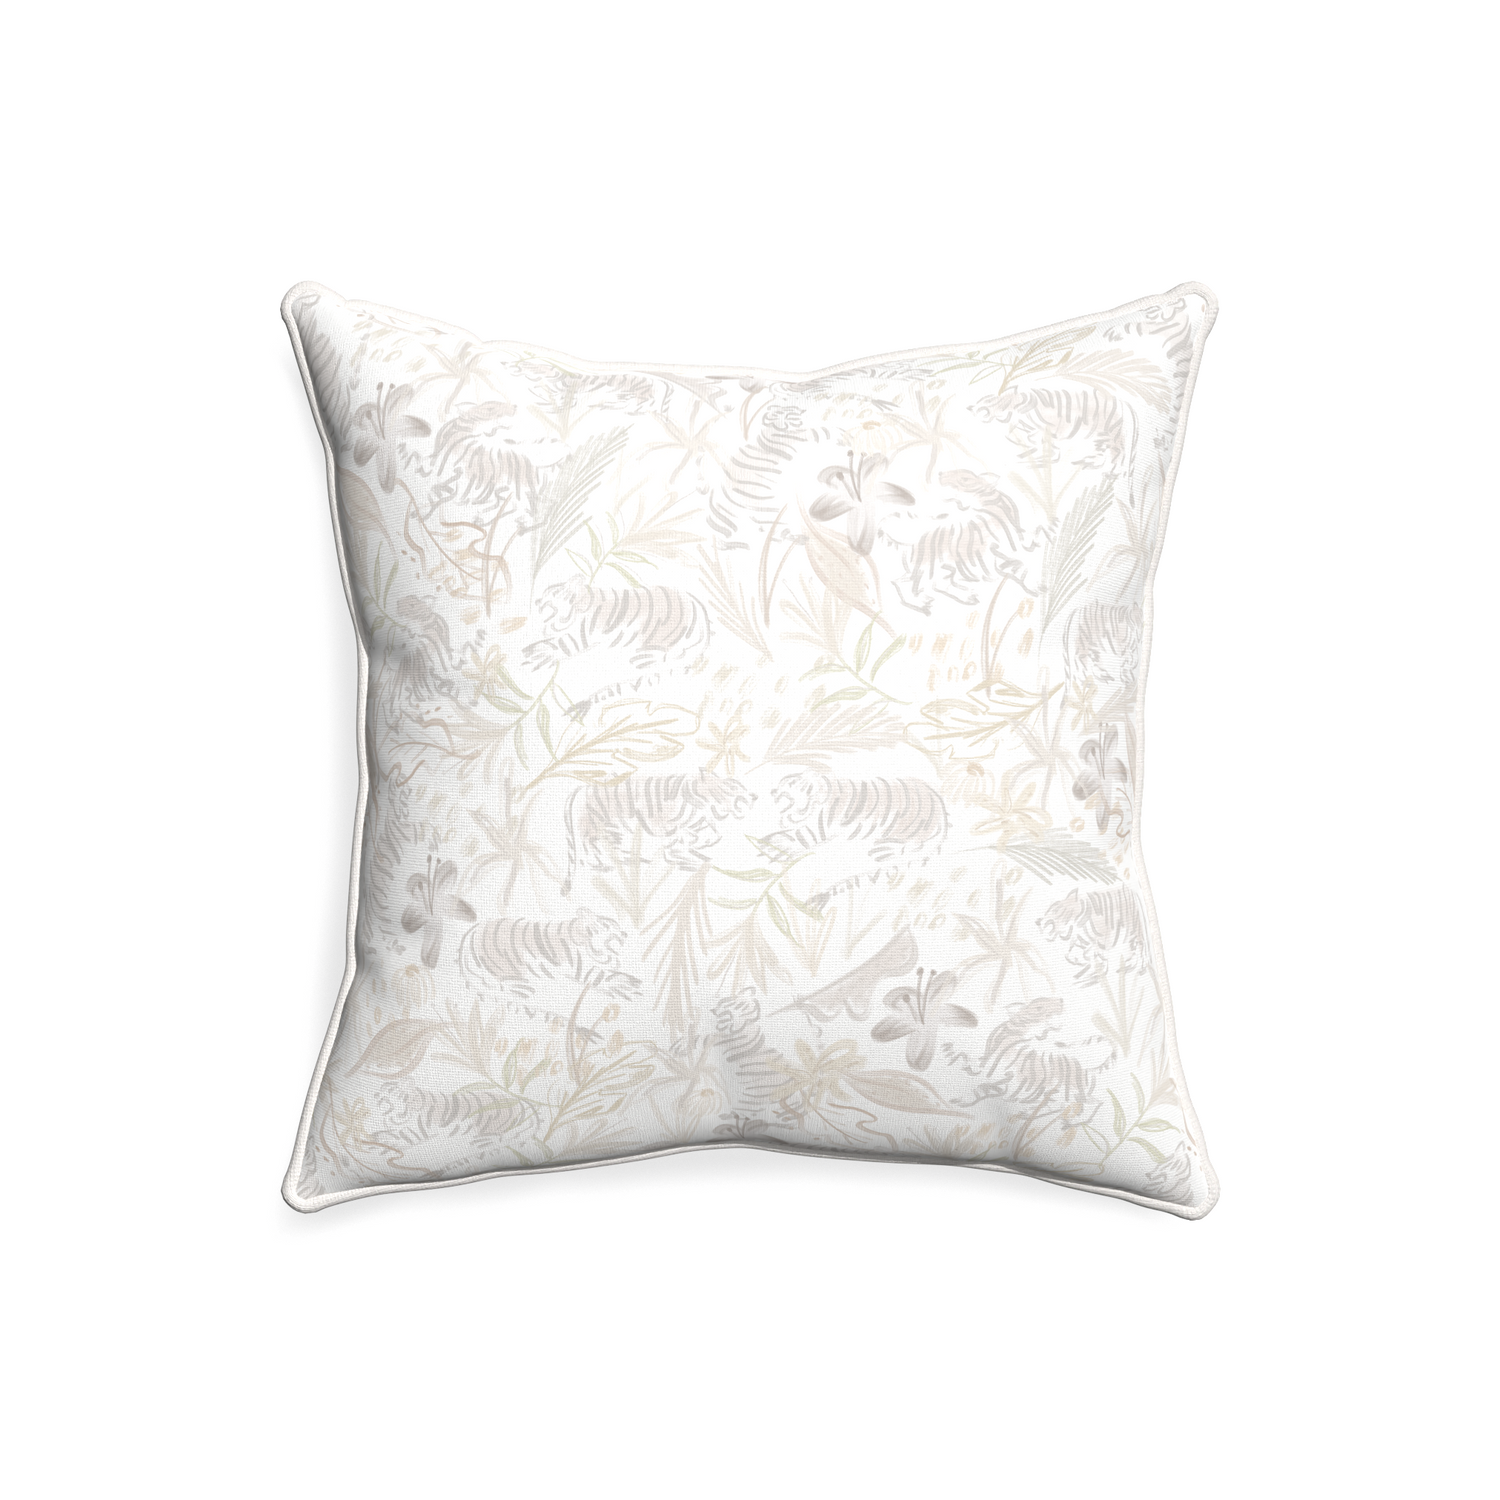 20-square frida sand custom beige chinoiserie tigerpillow with snow piping on white background